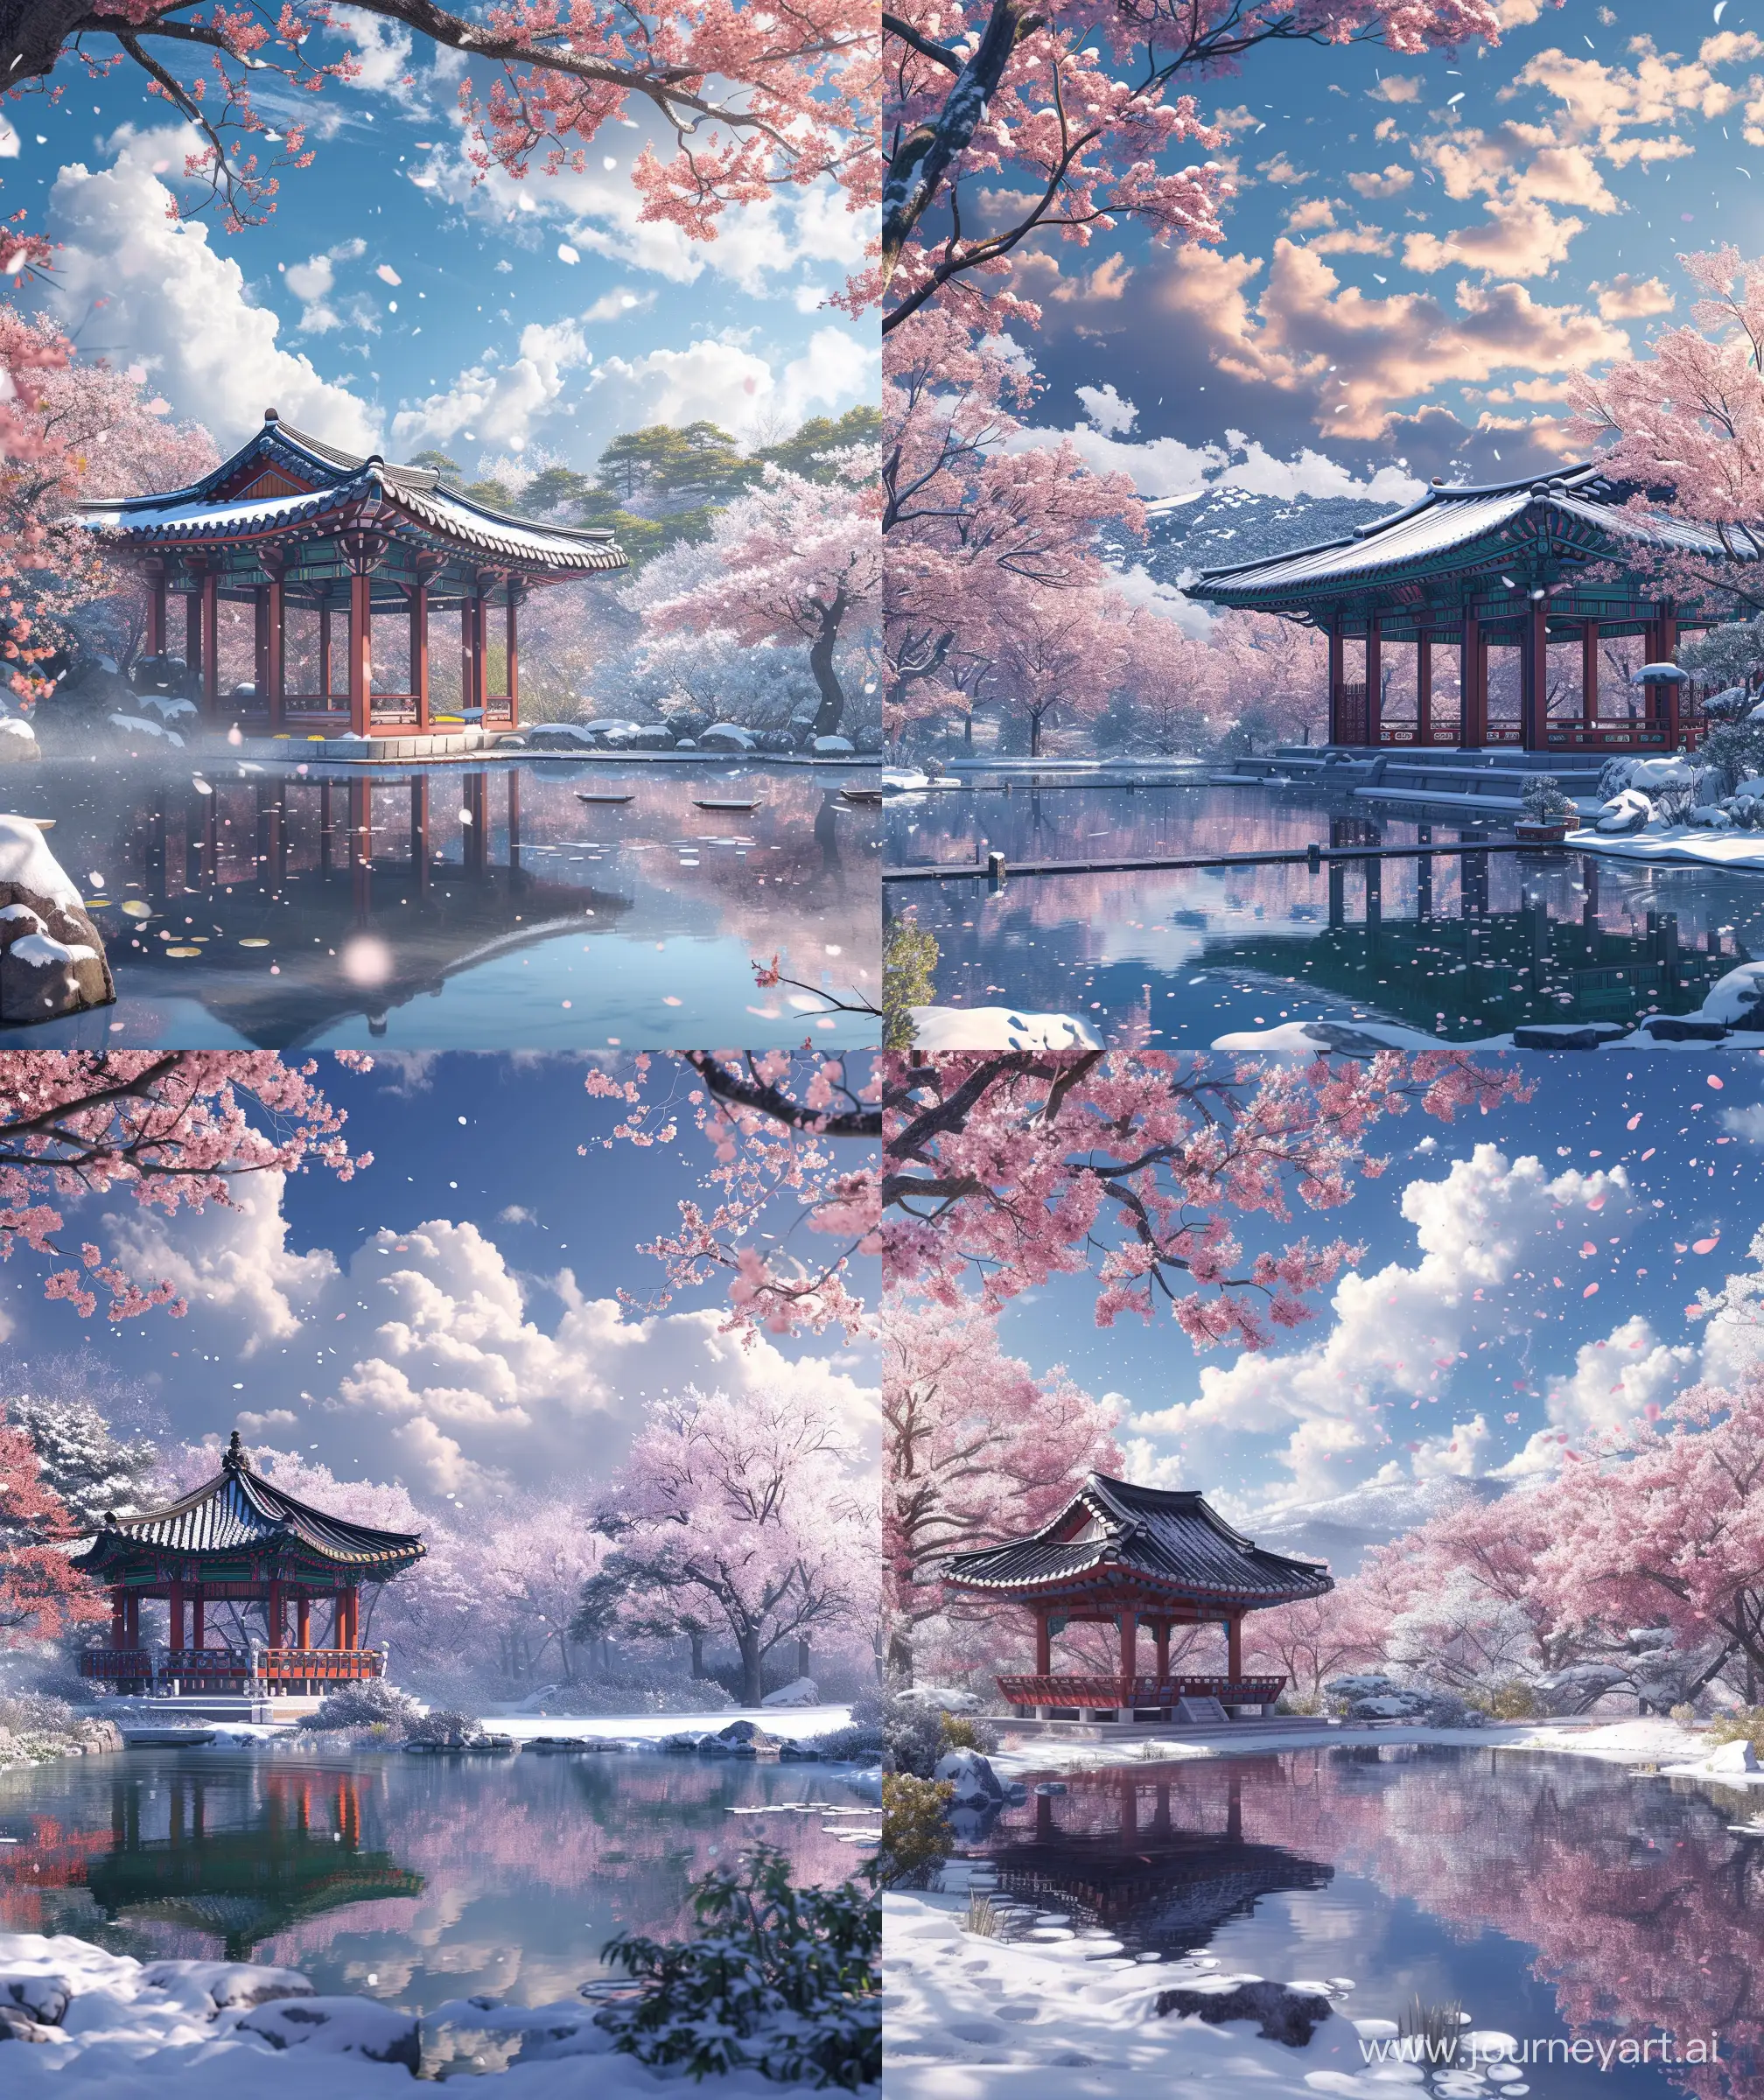 Mokoto shinkai style, anime scenary, day time, cherry blossom after winter, snow and cherry blossom, where winter end spring start, snow, Korean royal pavilion, zen pond, beautiful sky and clouds, Ultra HD, sharp details, --ar 27:32 --v 6.0